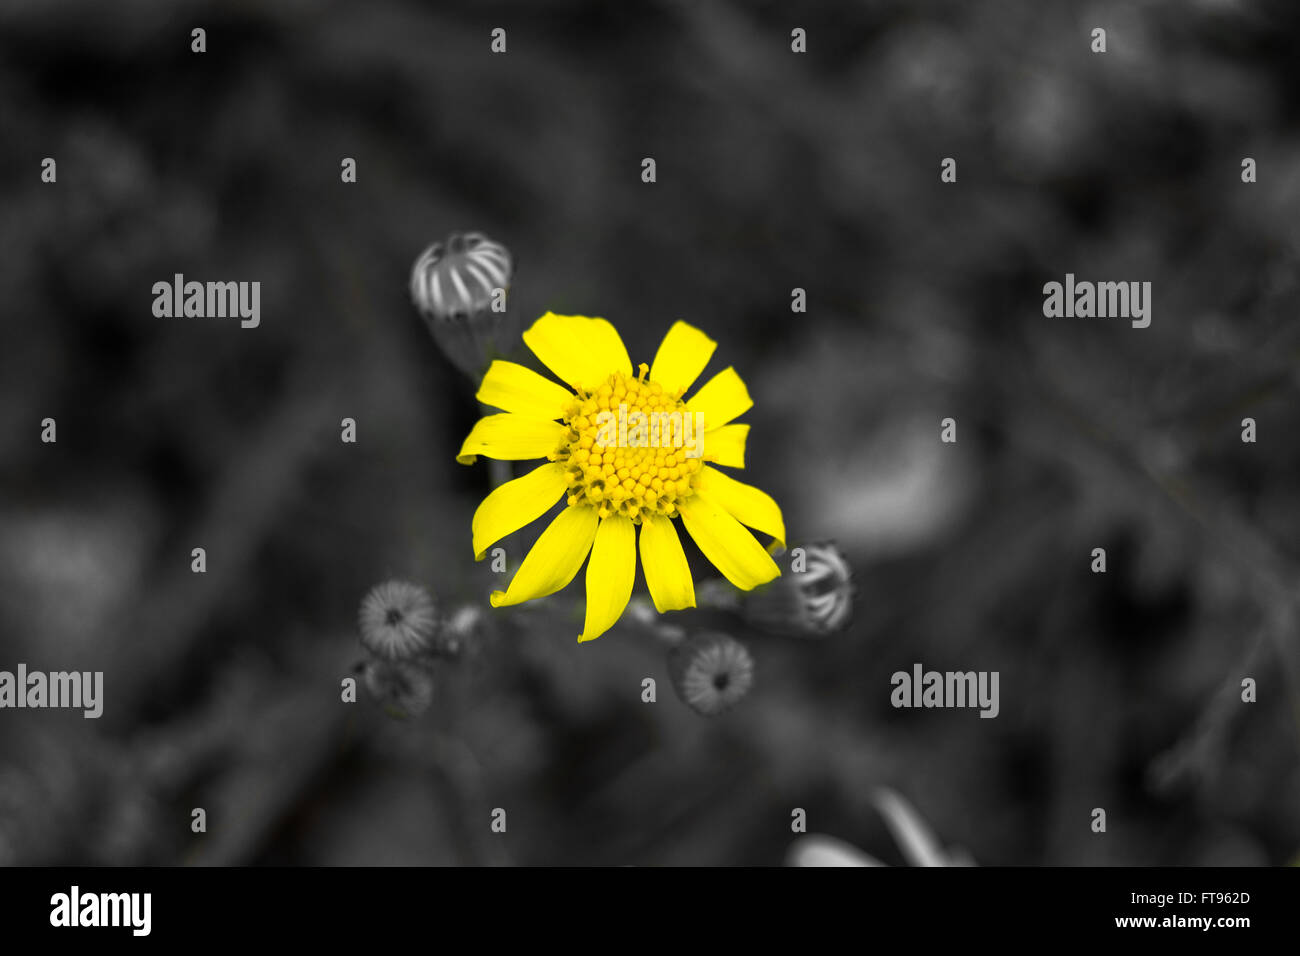 A flower made with selective color isolated from the colorful background. Stock Photo